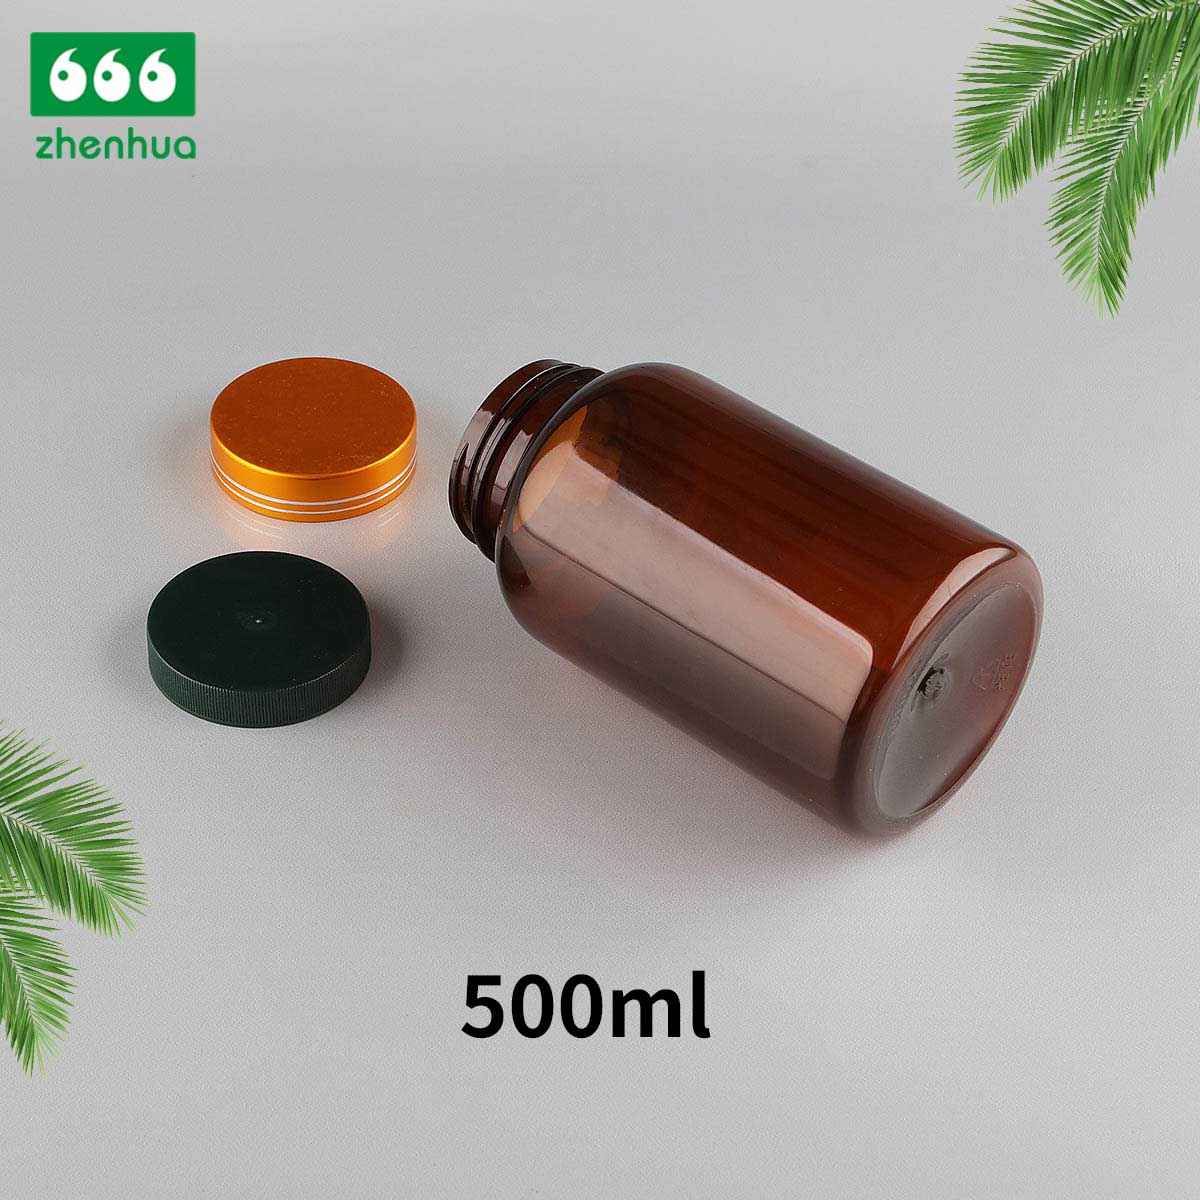 200/300/500/750ml Round Amber Fish Oil/Capsule/Nutritional Supplement PET Bottle with Pressure Screw Cap